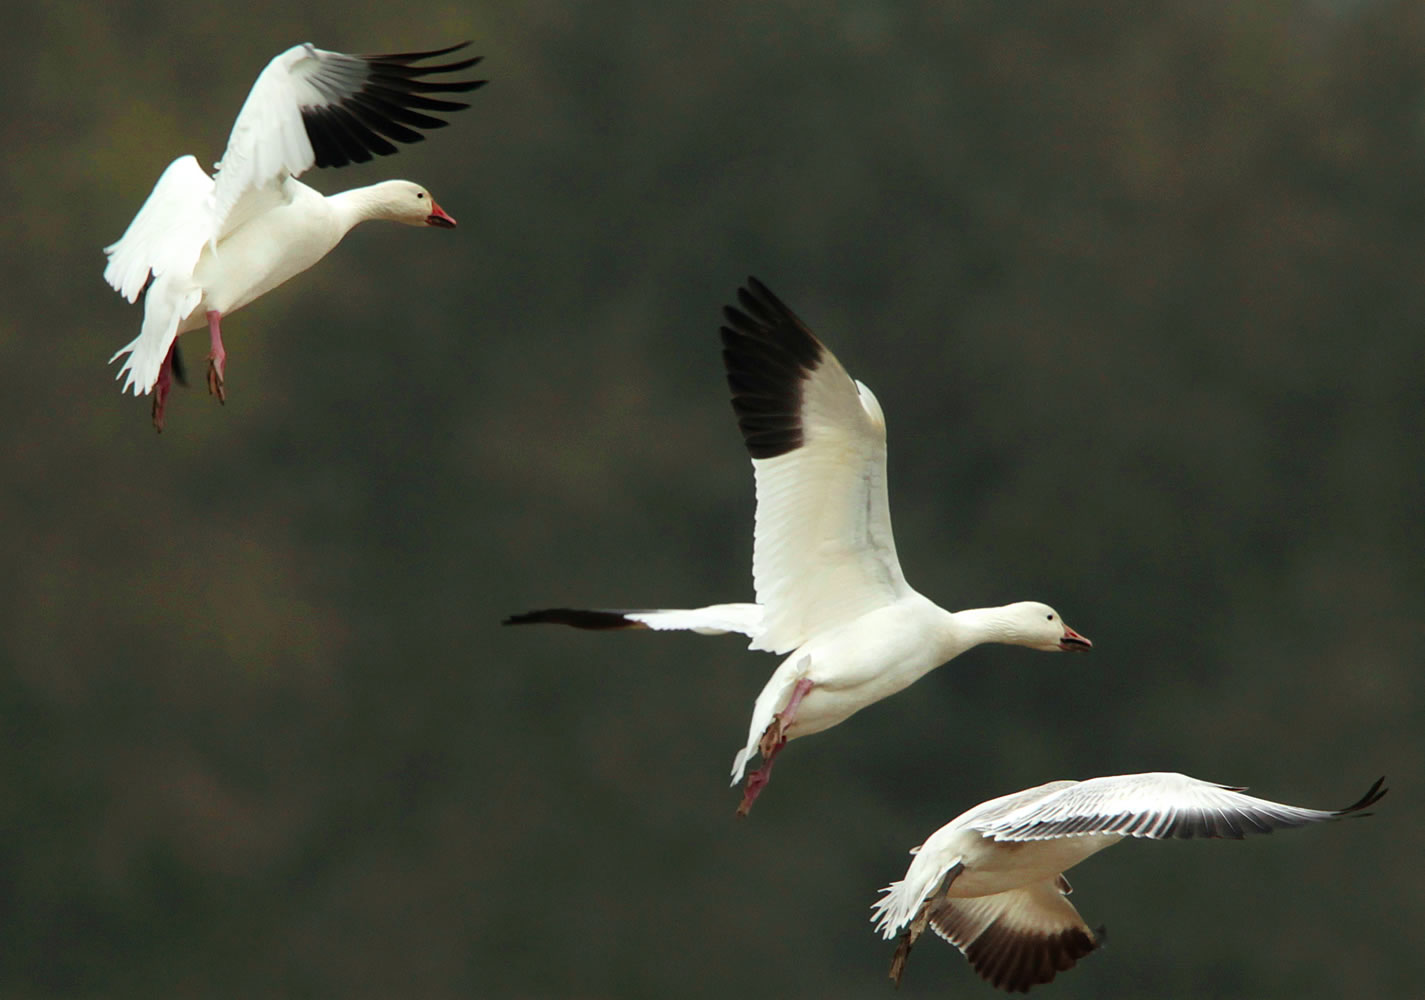 Snow geese land in a field along Norman Road between Silvana, Wash. and Stanwood, Wash., Wednesday, Oct. 16, 2013.